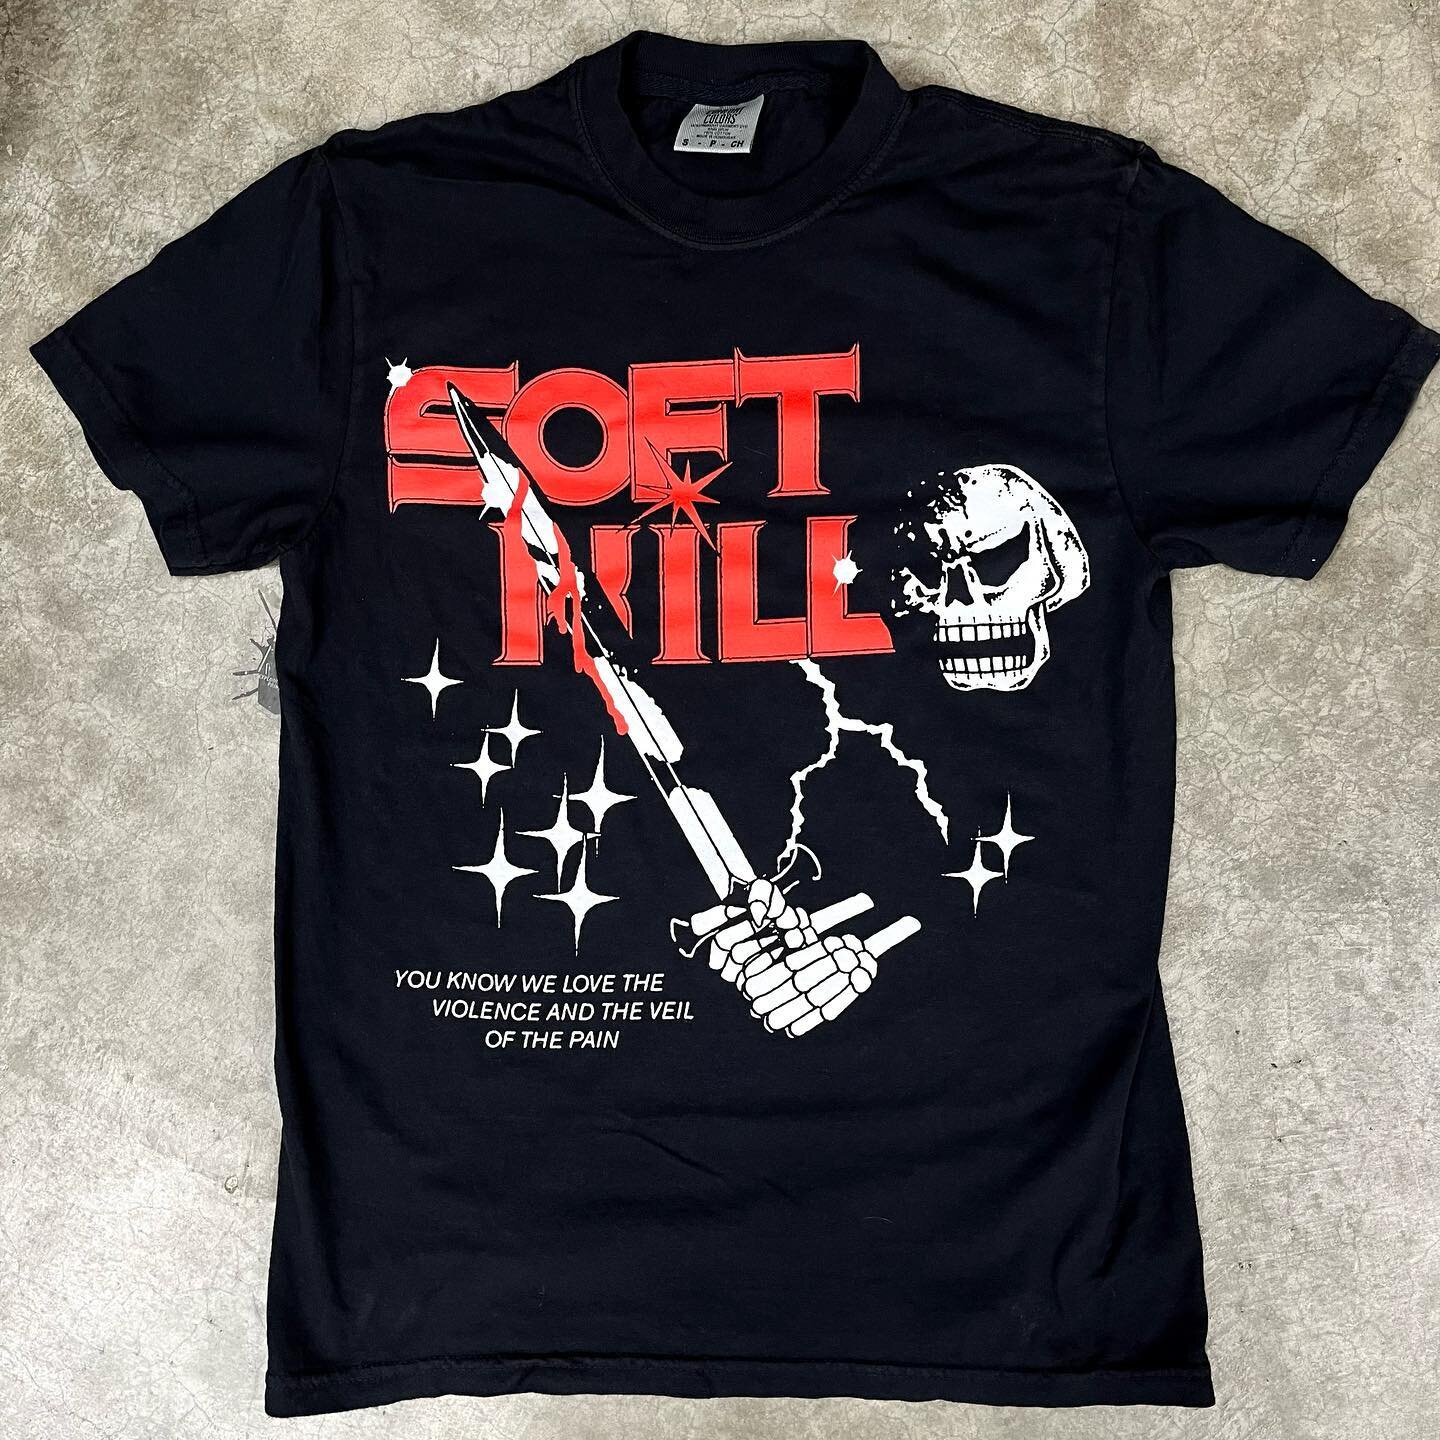 💀+⚔️on Comfort Colors tees for @softkillpdx 
💥🏠💥

#explodinghouseprinting #softkill  #chicago #chicagoscreenprinting #comfortcolors #tee #skull #sword #violenceandveil